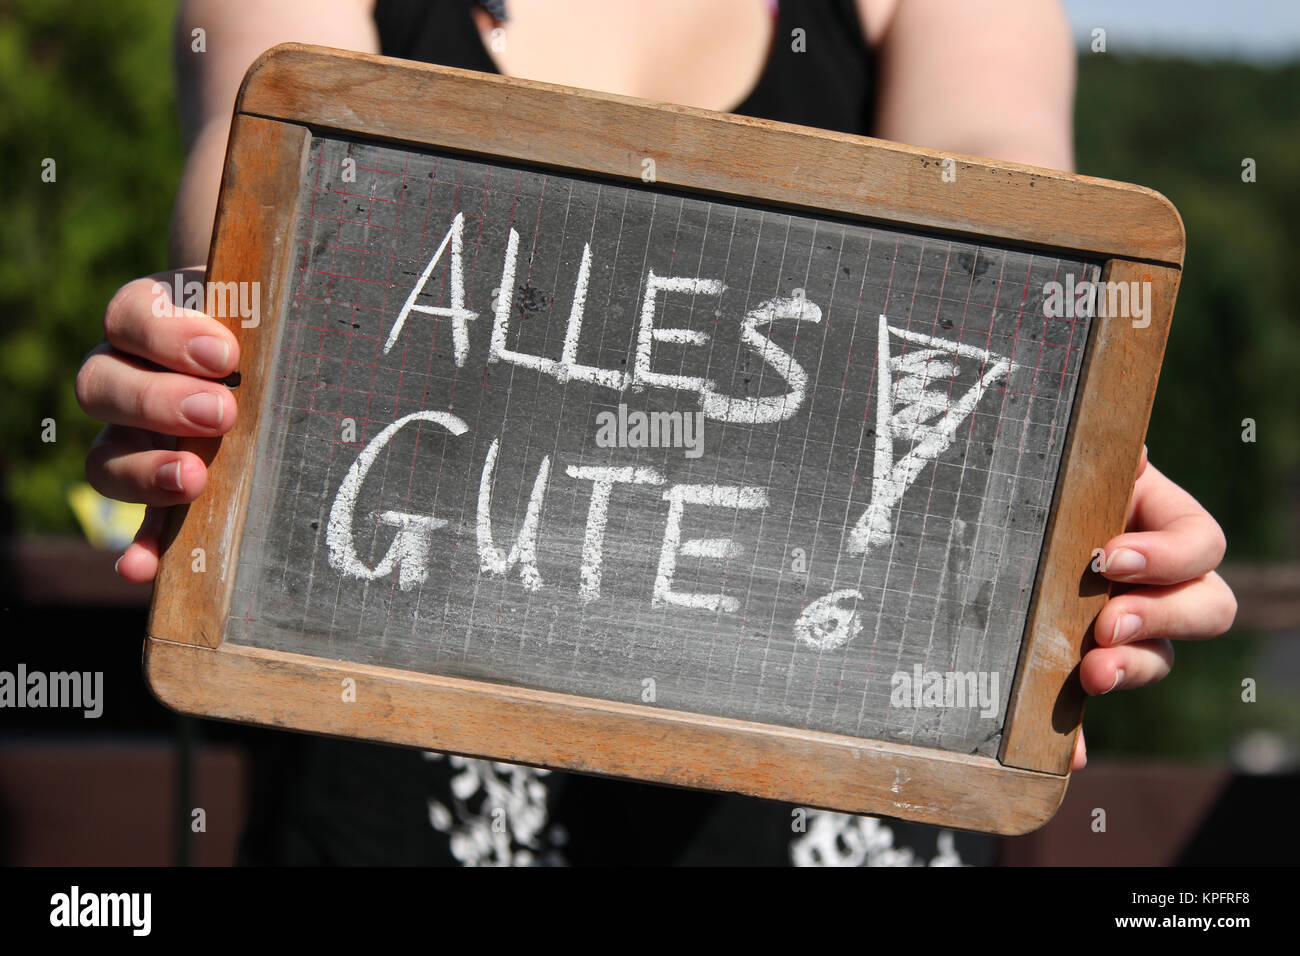 ALLES GUTE (all the best in German) written with chalk on slate shown by young female Stock Photo